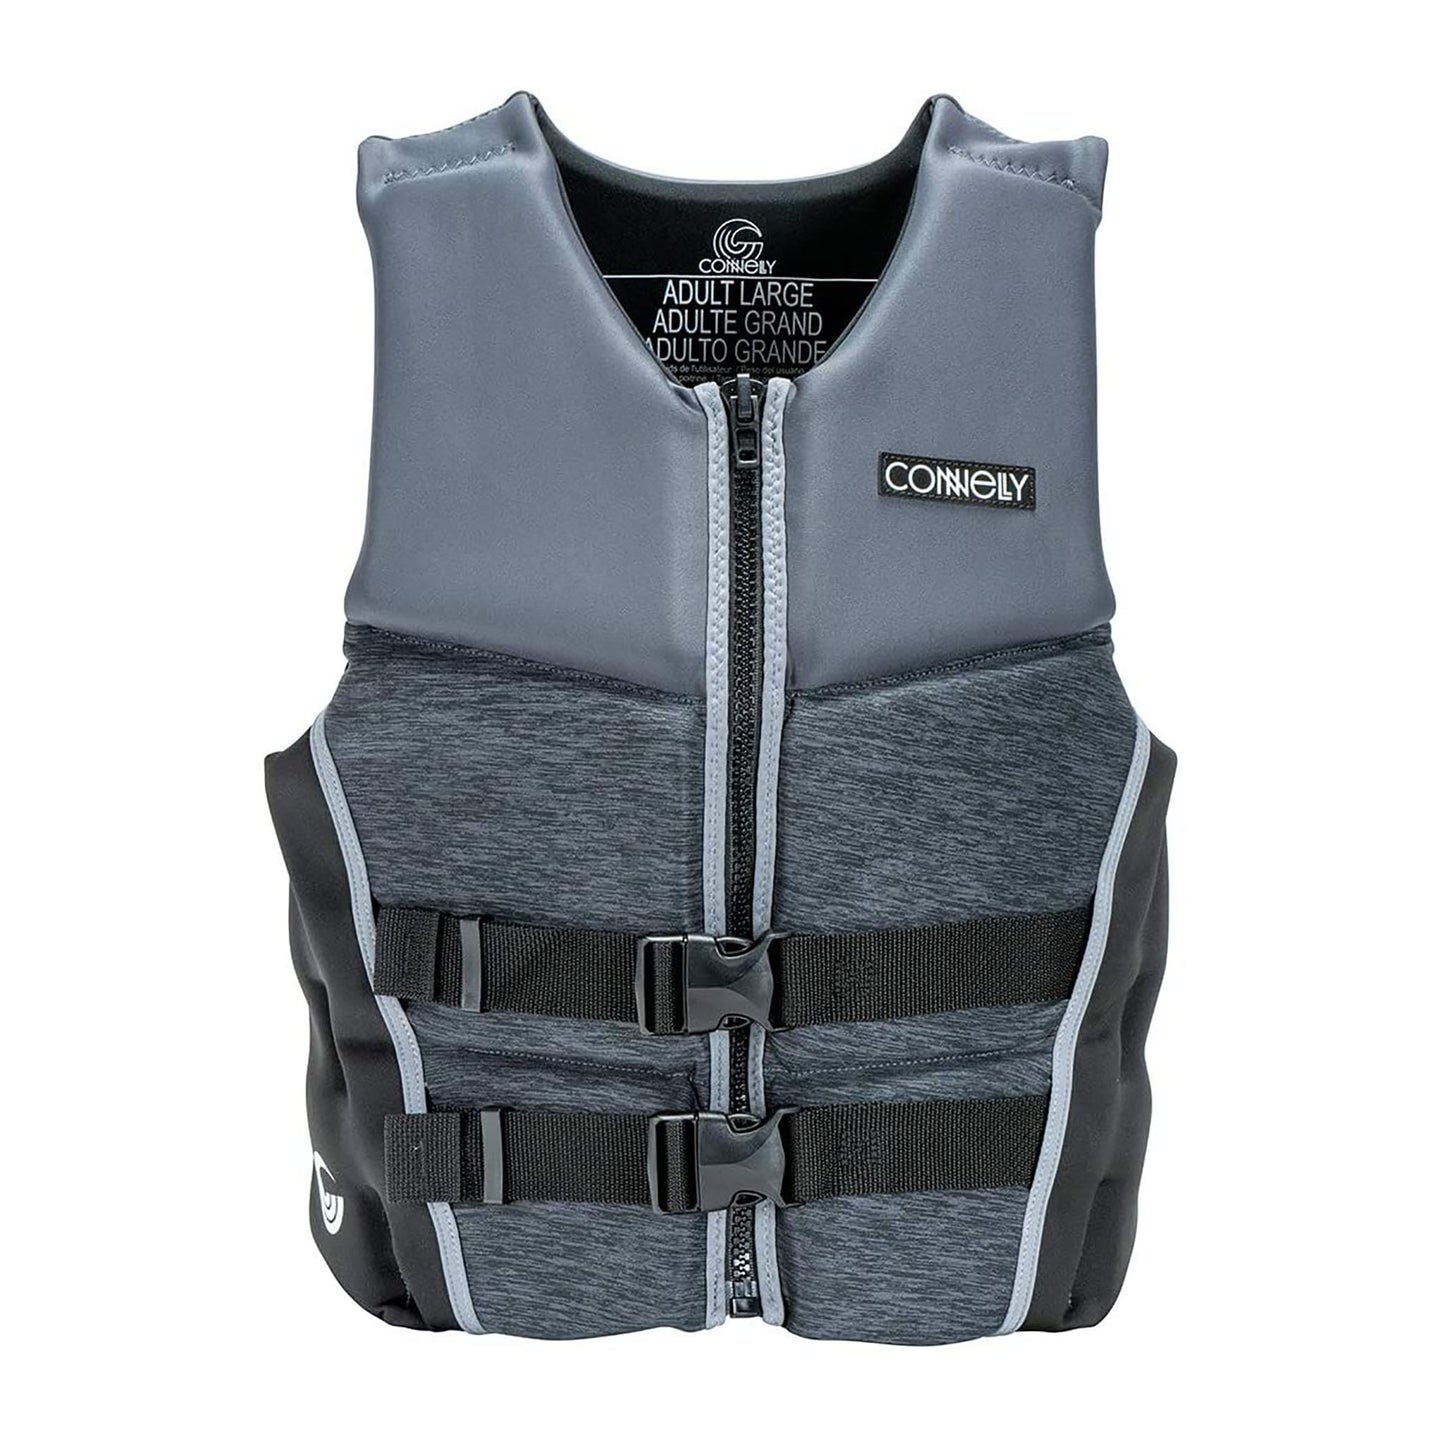 CONNELLY Men's Classic Neoprene Life Jacket